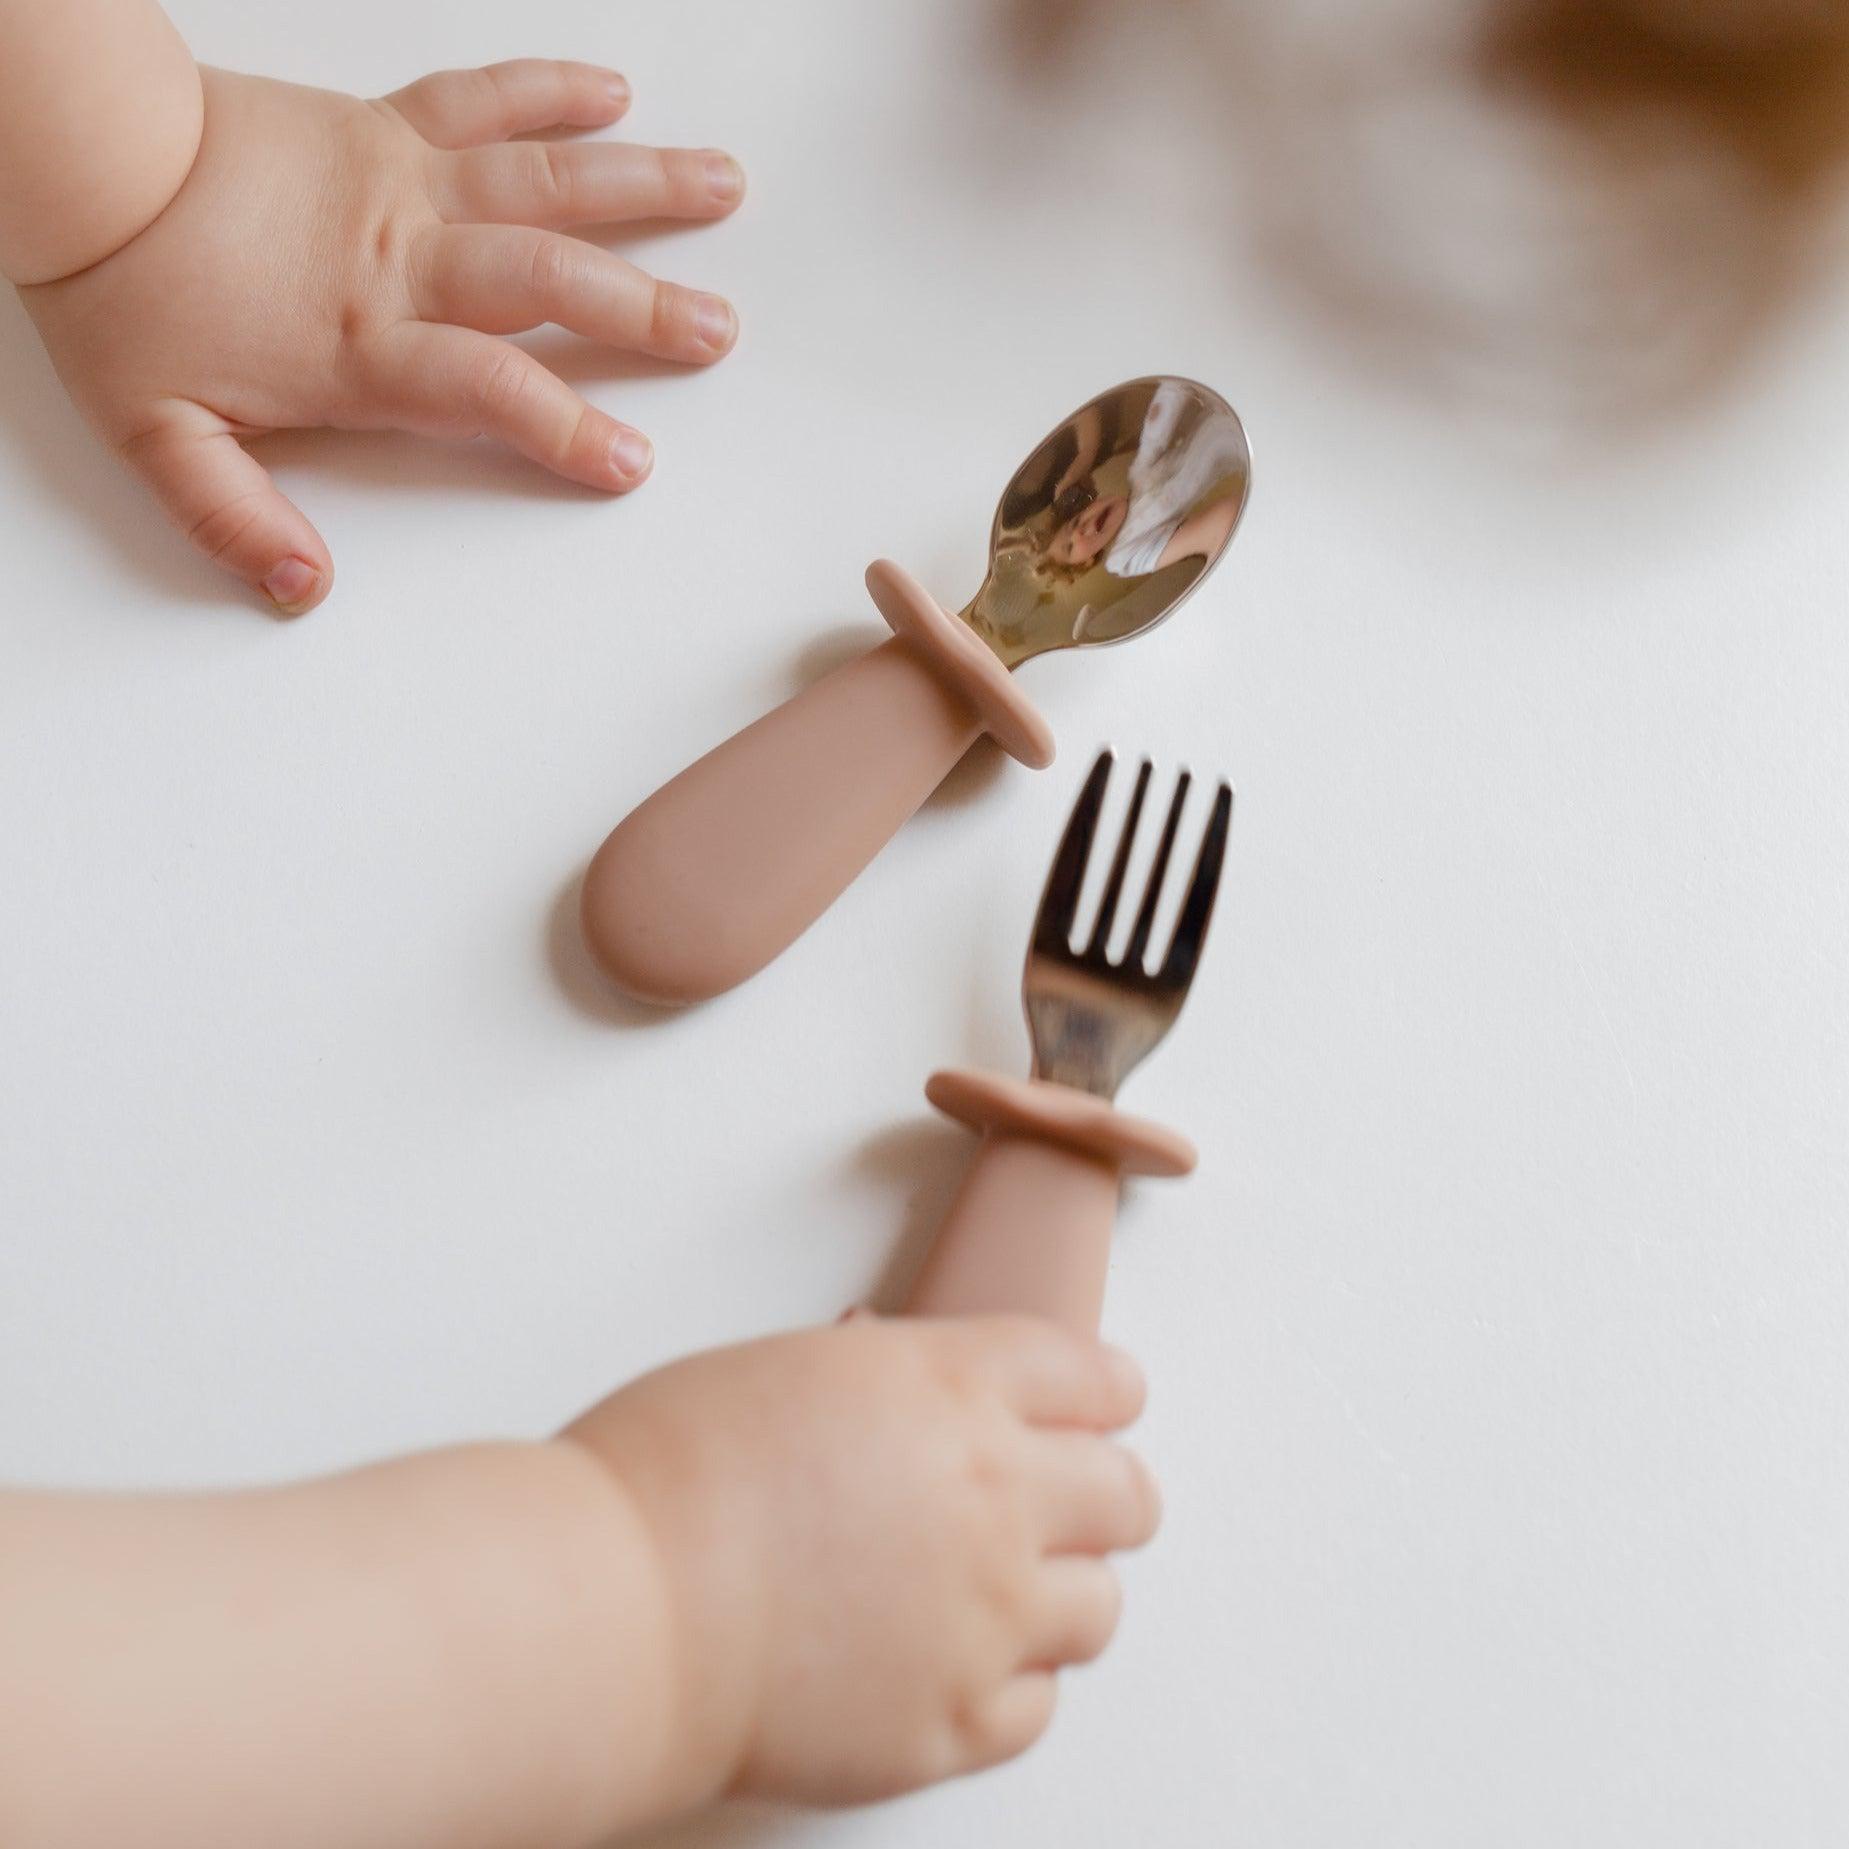 A Rommer toddler cutlery set in nude, being held by a toddler's hand during mealtime.